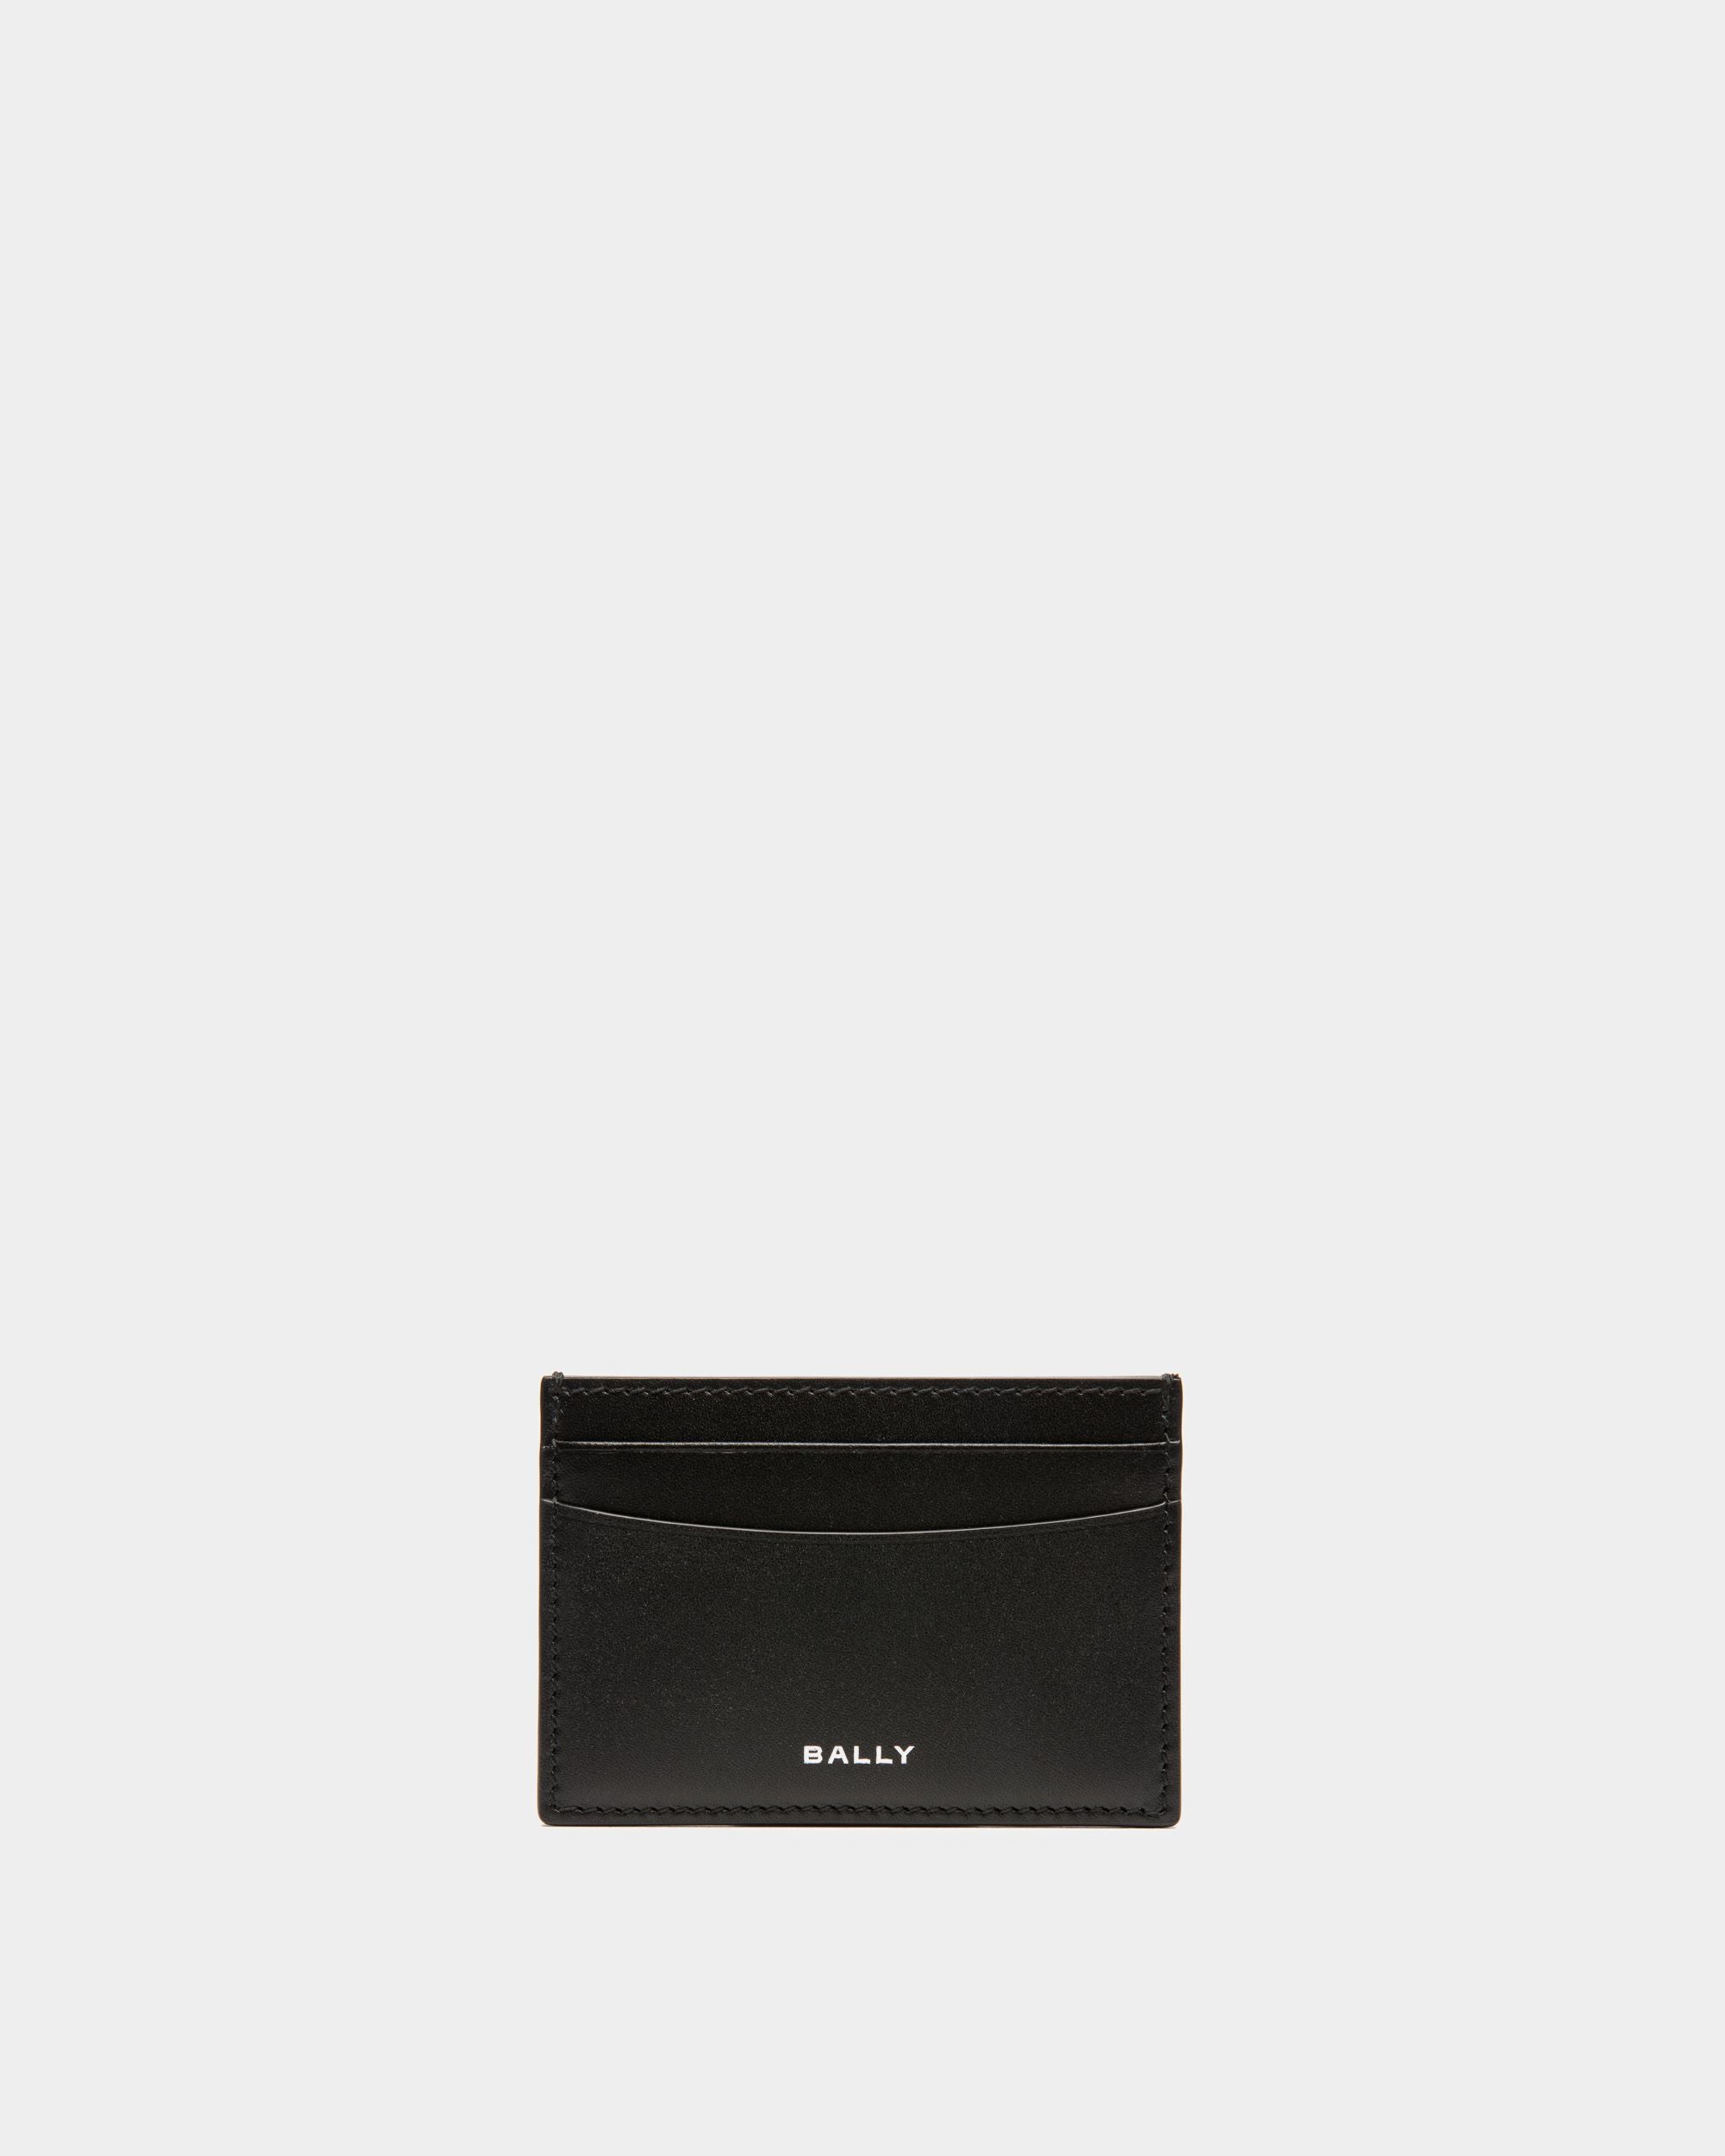 Busy Bally | Men's Card Holder in Black Leather | Bally | Still Life Front